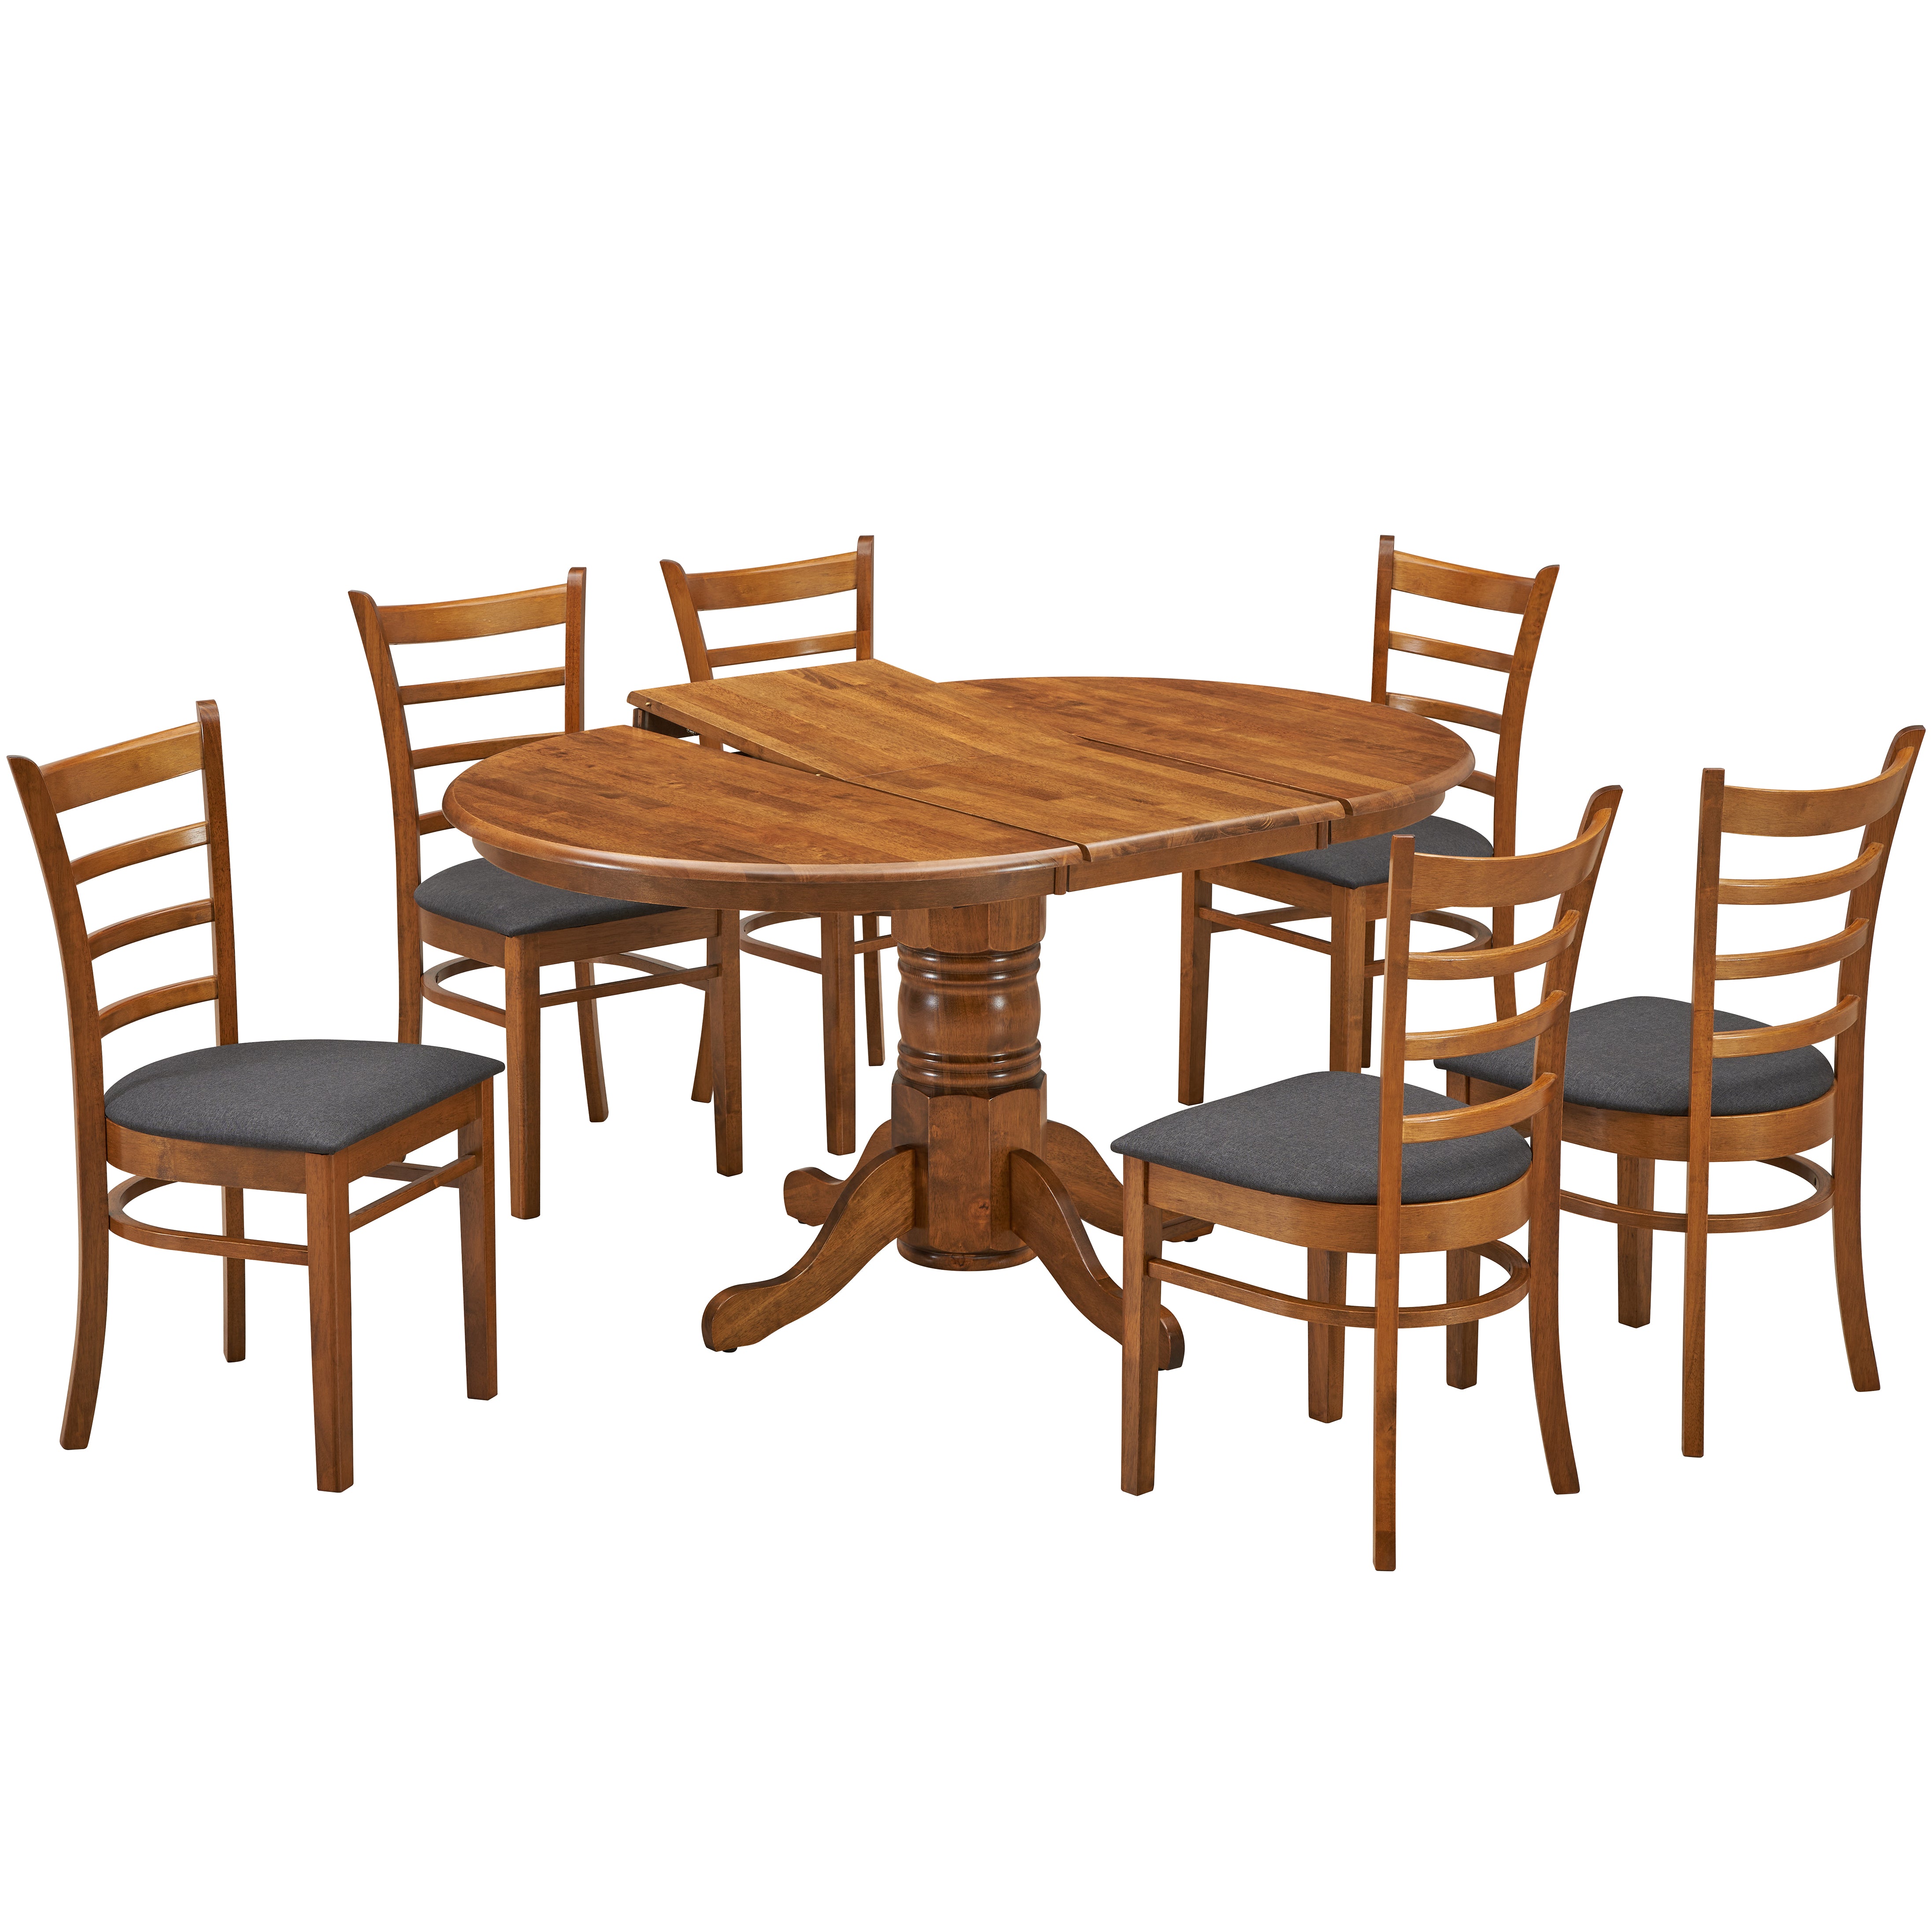 Linaria 7pc Dining Set 150cm Extendable Pedestral Table 6 Timber Chair - Walnut - SILBERSHELL